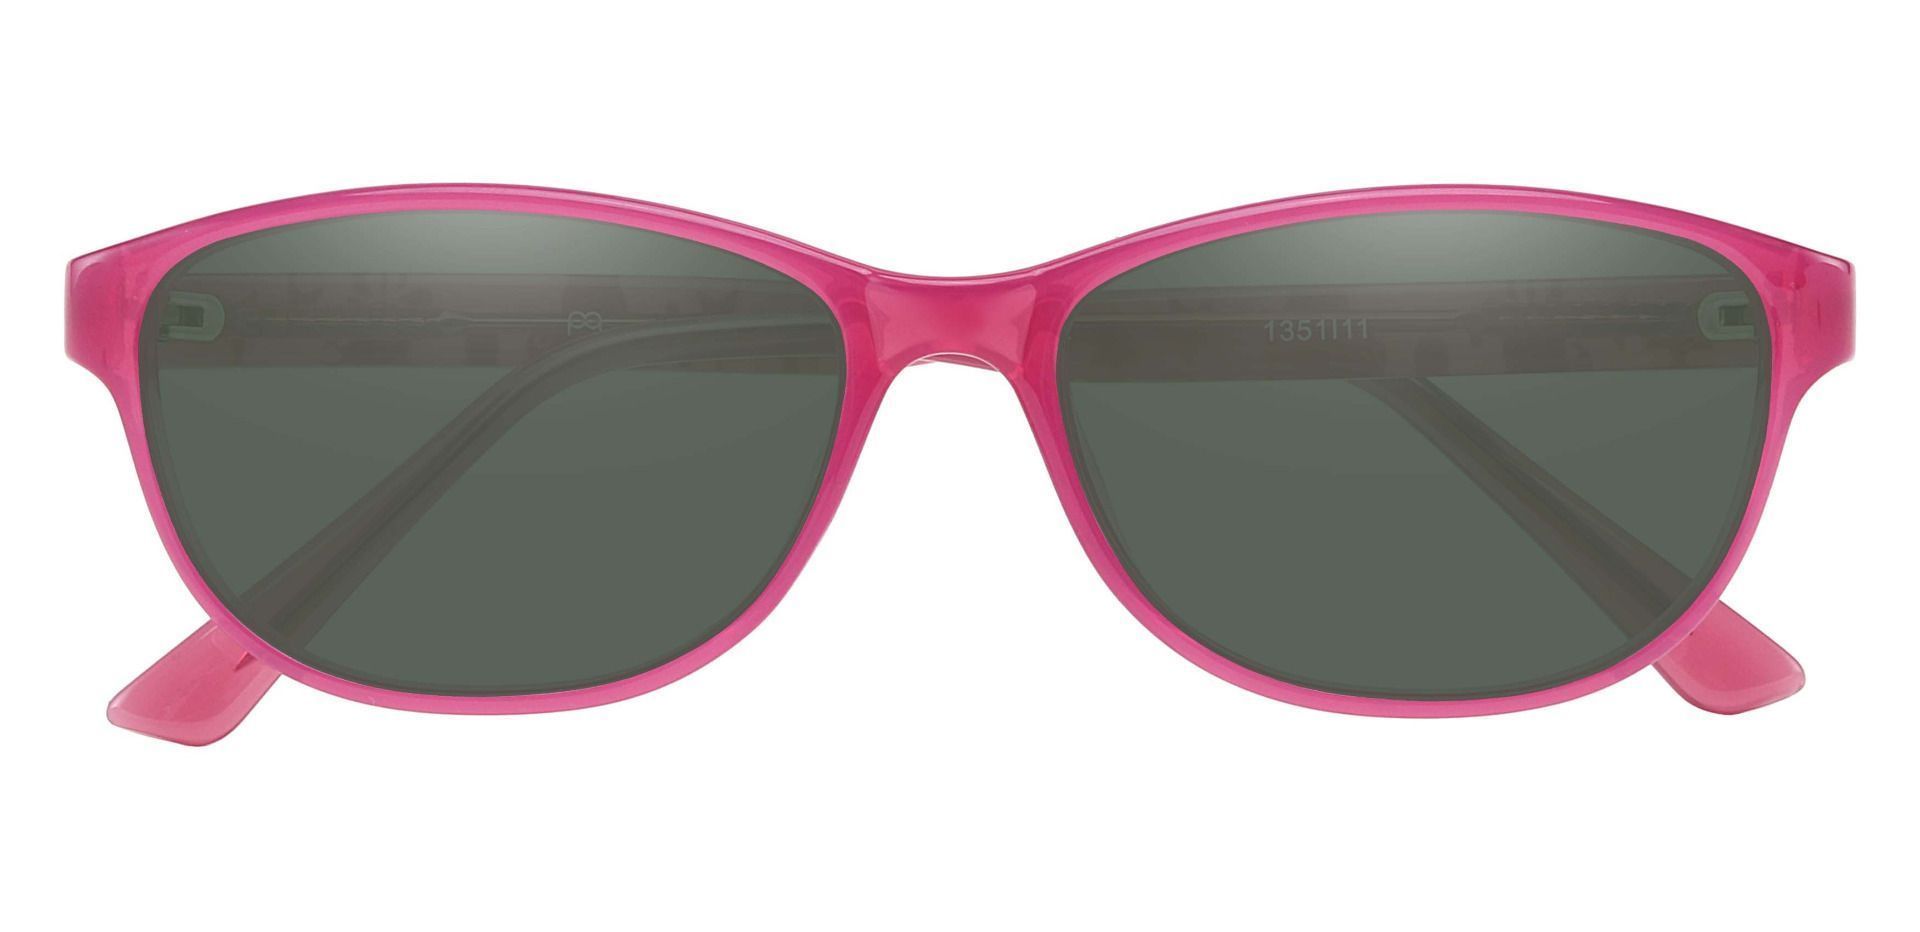 Patsy Oval Non-Rx Sunglasses - Pink Frame With Green Lenses